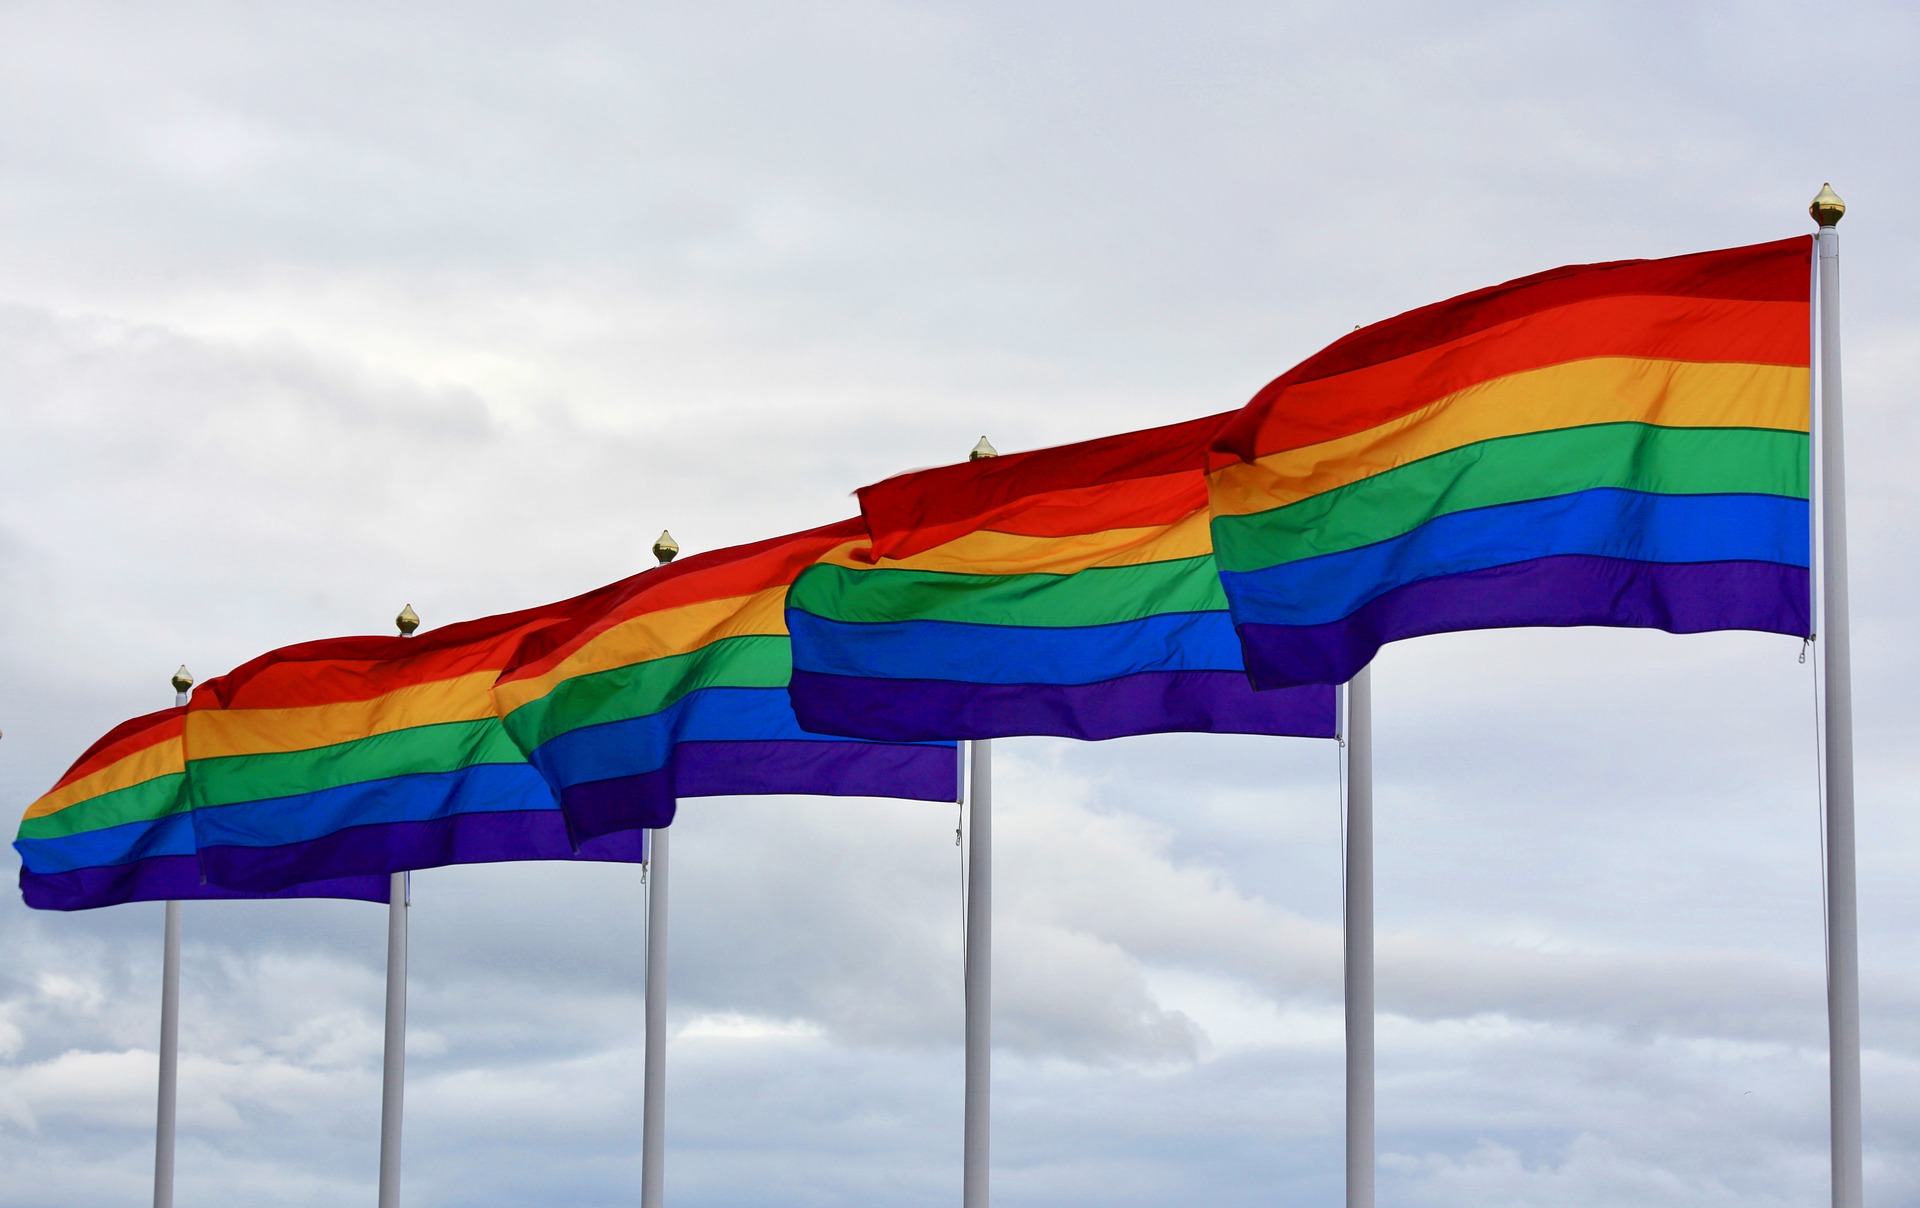 A Row of 5 Pride Flags blowing in the wind